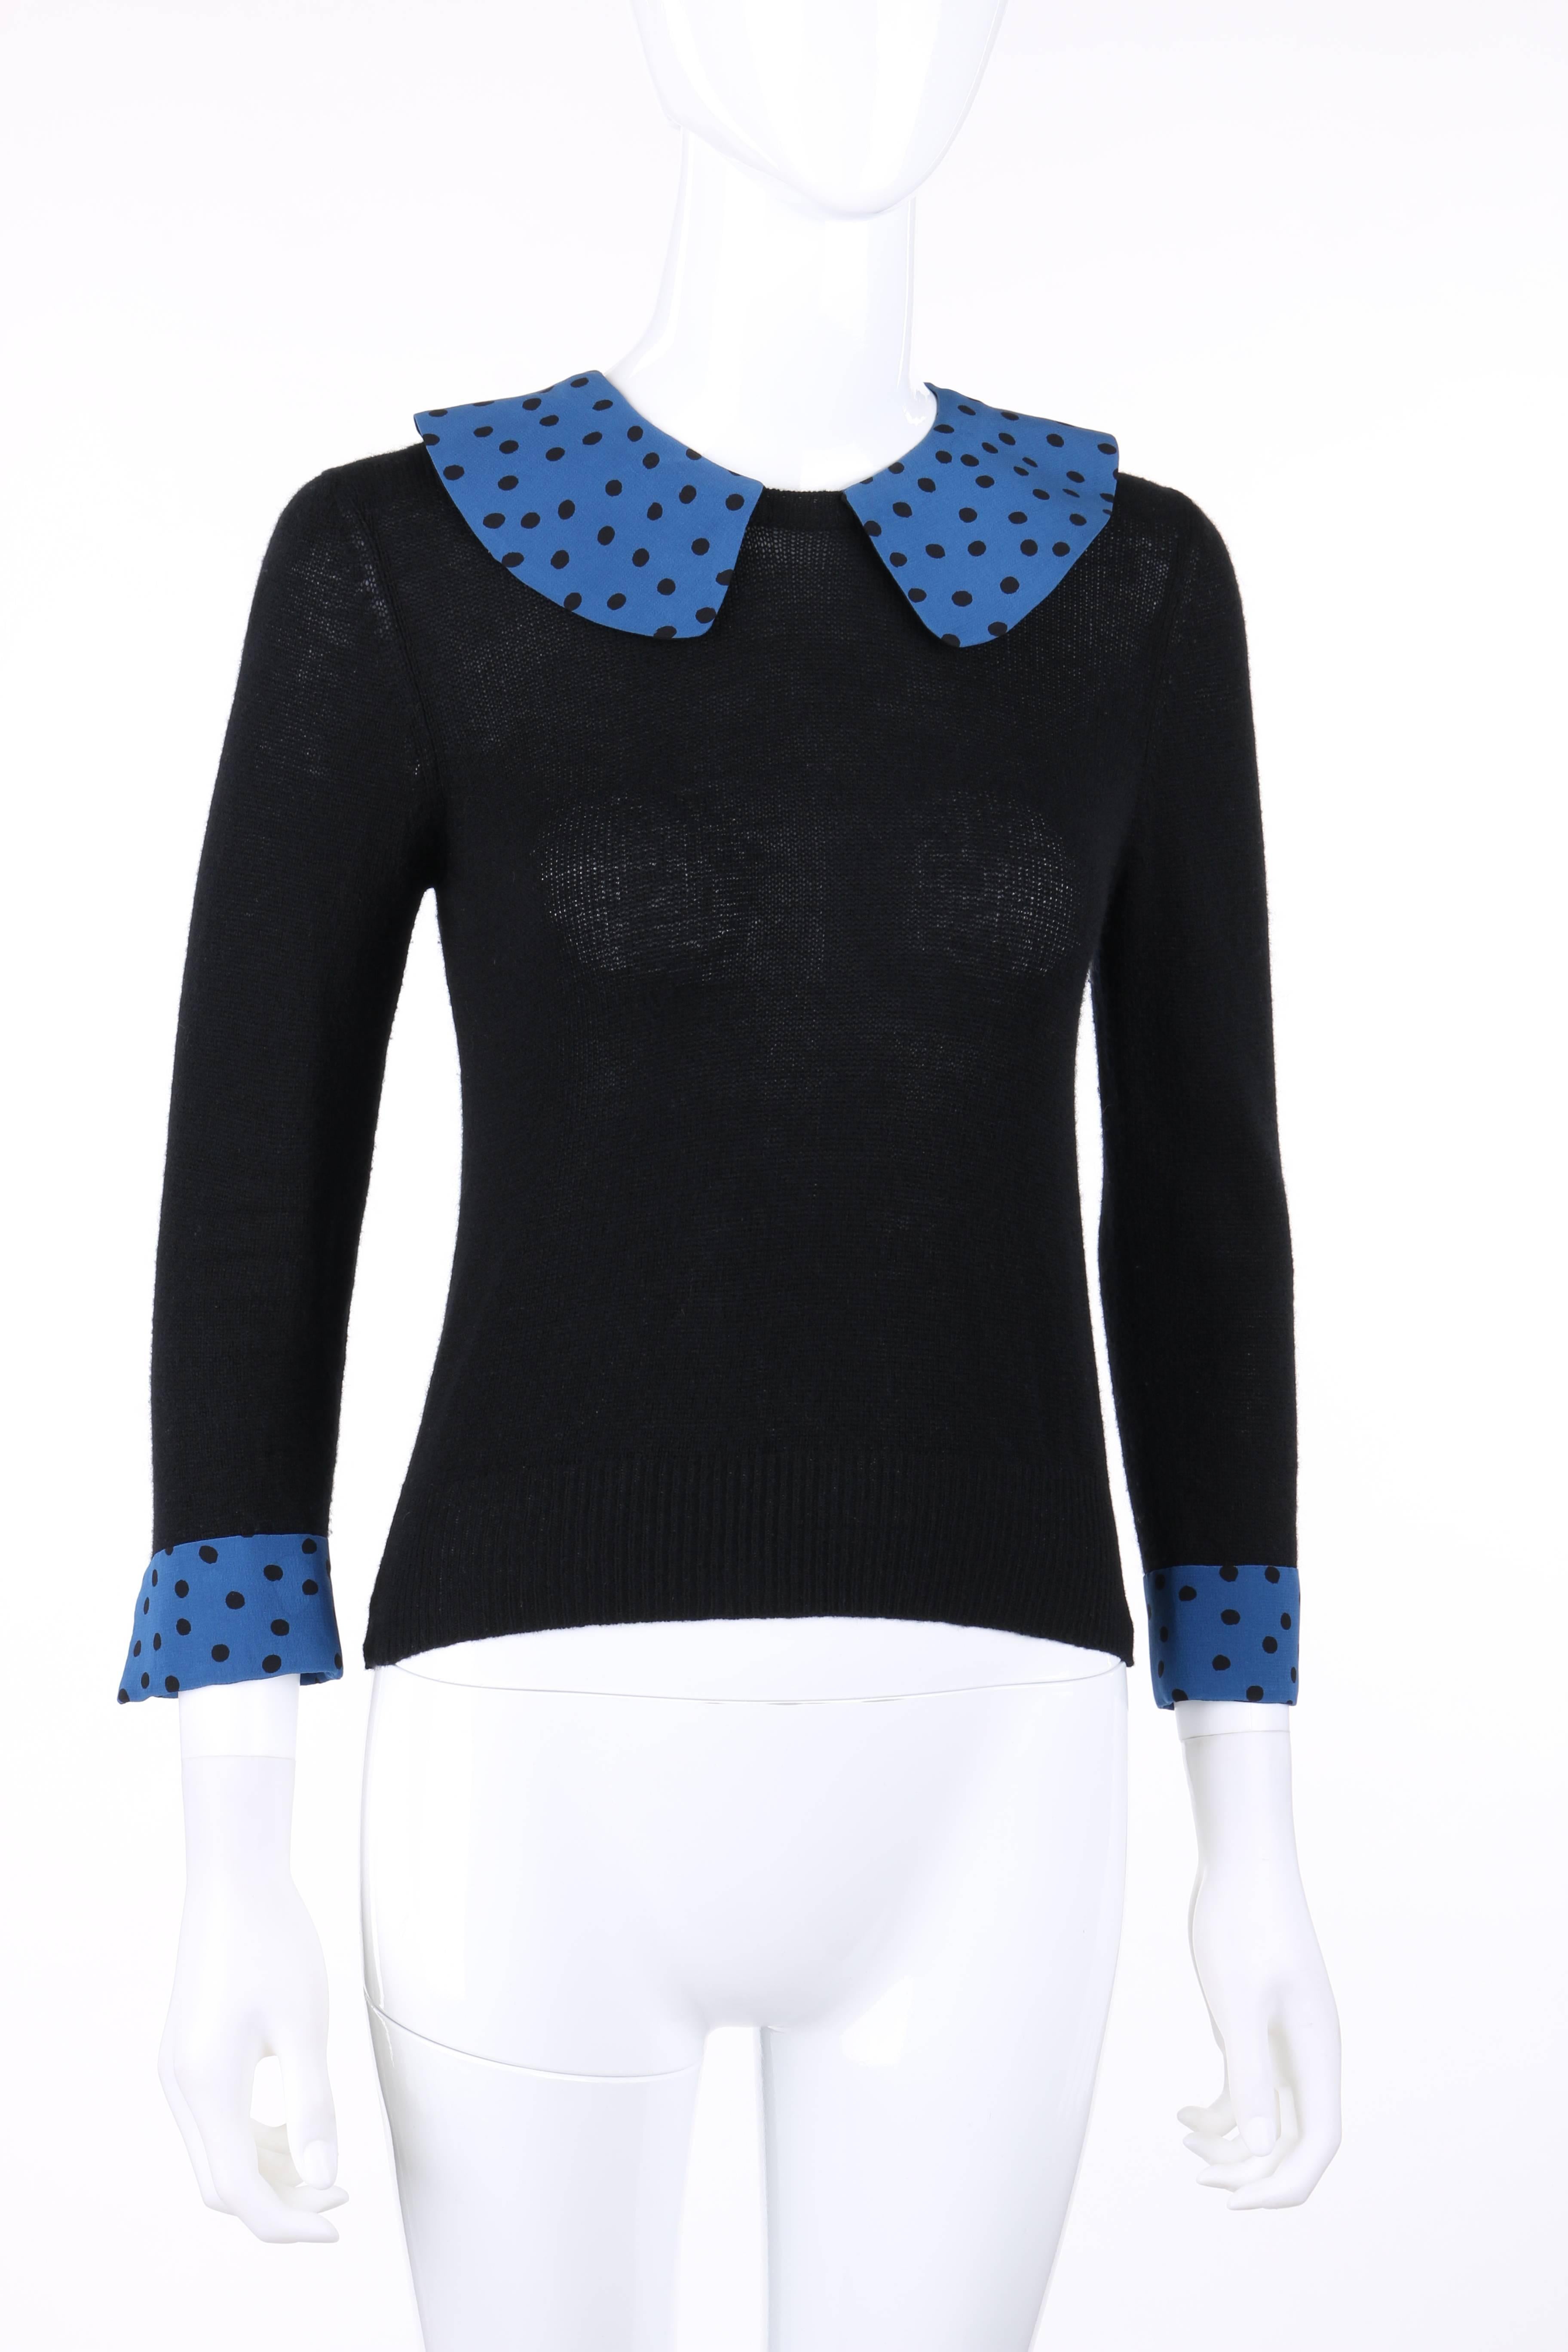 Louis Vuitton S/S 2005 black & blue polkadot wool cashmere sweater. Designed by Marc Jacobs. 3/4 length sleeves. Silk blue & black polkadot peter pan collar and cuffs. Thirteen center back blue & black polka dot dome button closures. Rib knit